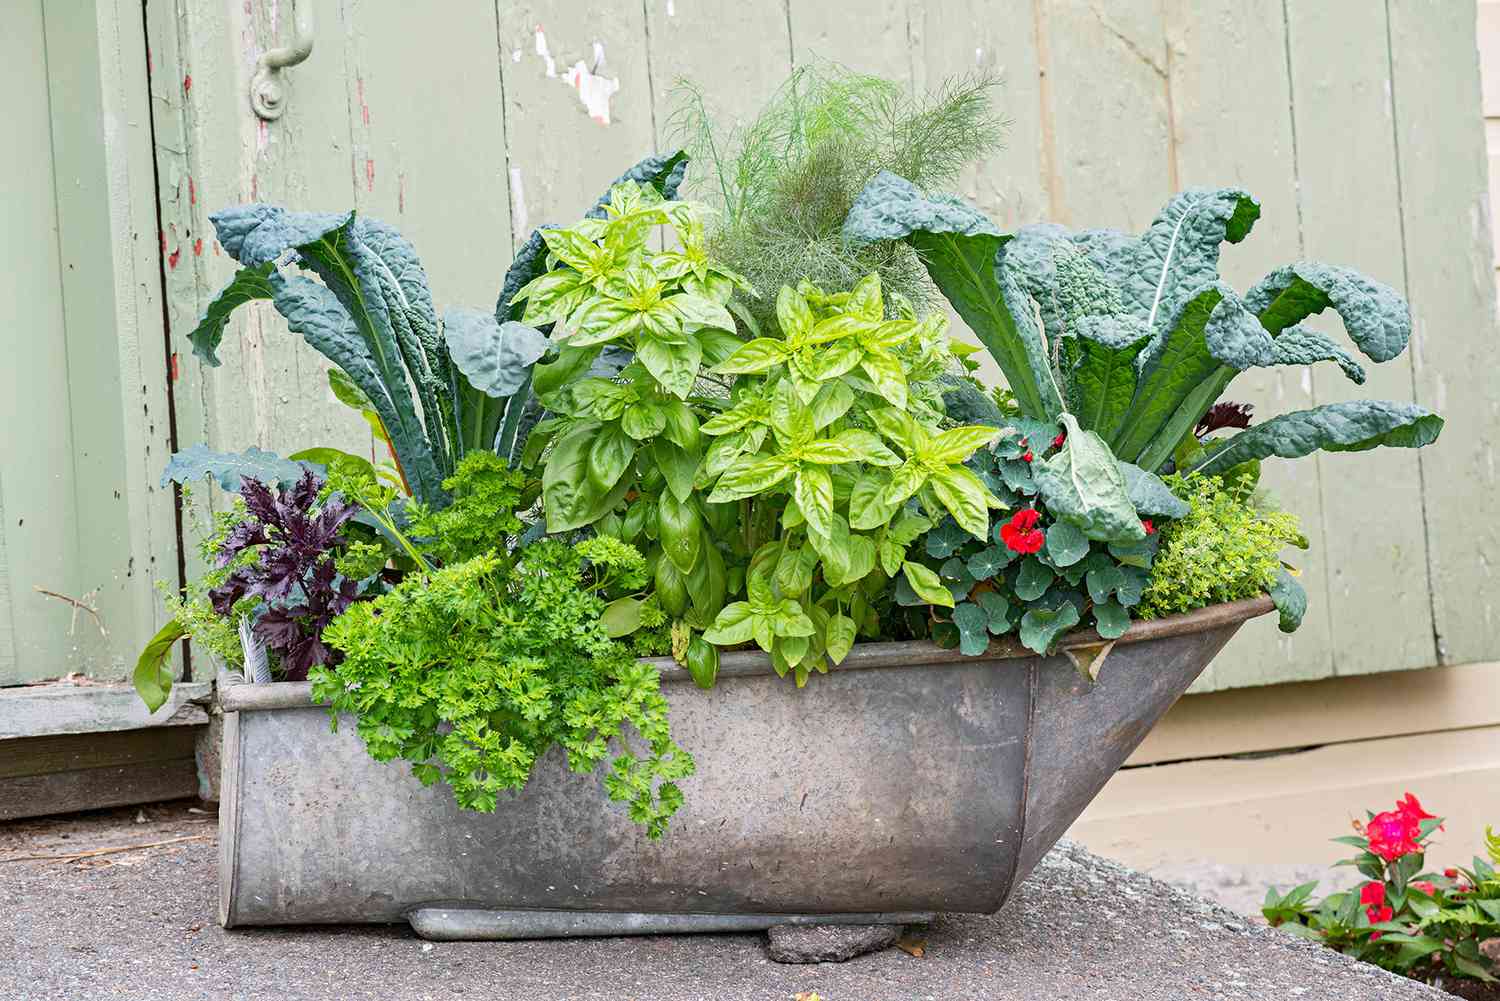 metal bathtub shaped container filled with lush plants